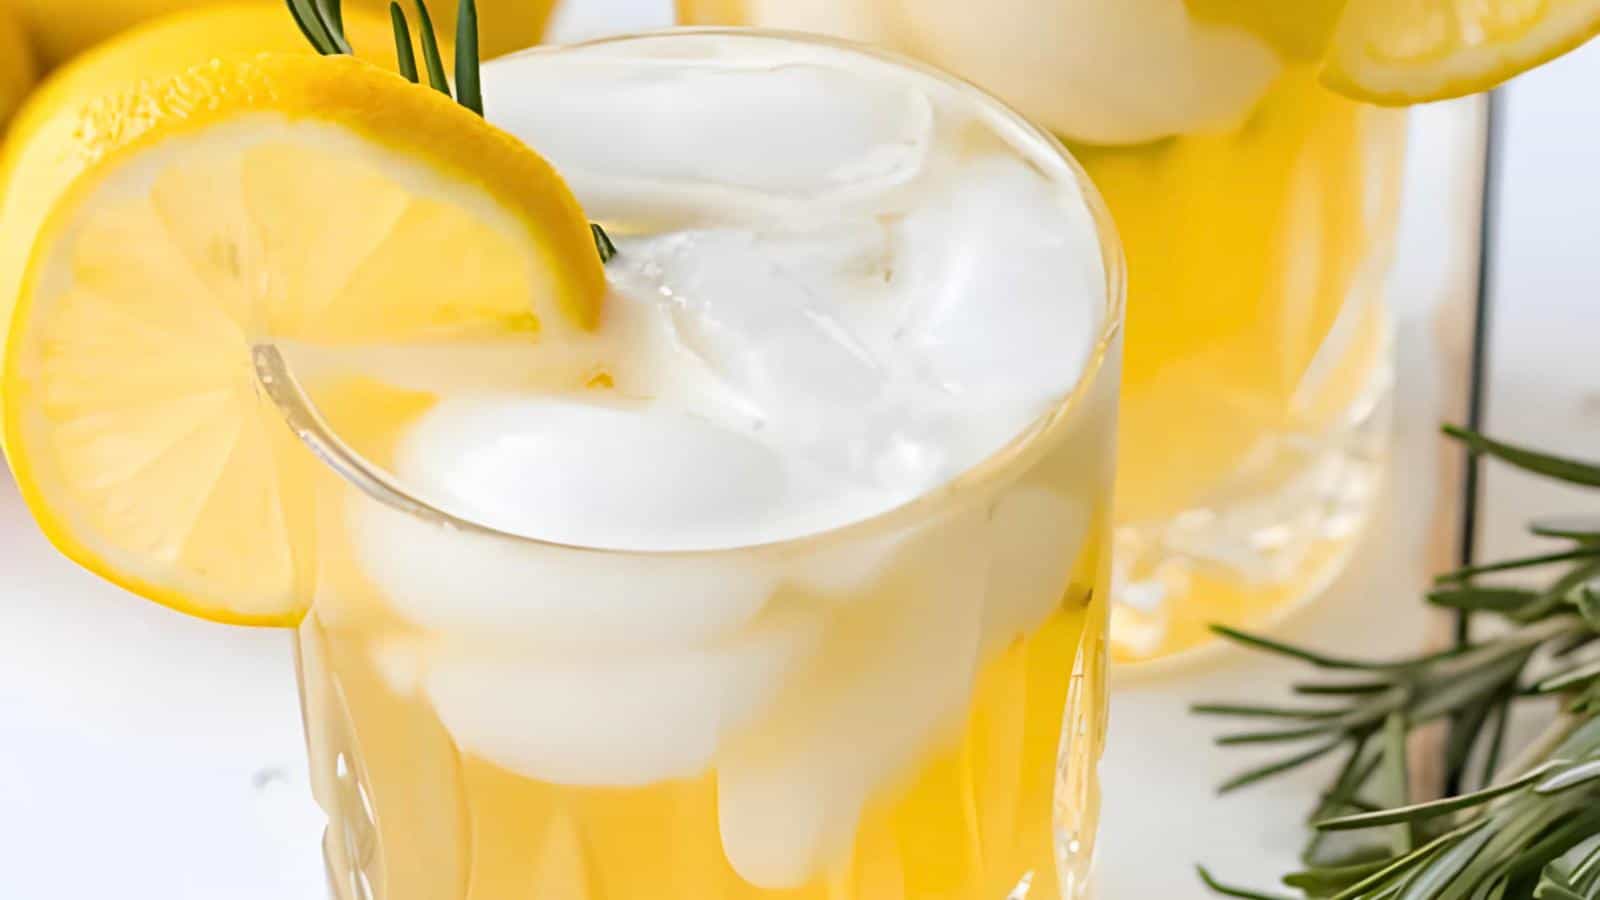 <p>Brighten your day with a Lemon Drop Cocktail. This zesty summer drink features vodka, lemon juice, and a touch of sweetness. It’s tangy, refreshing, and perfect for summer nights.<br><strong>Get the Recipe: </strong><a href="https://whippeditup.com/lemon-drop-cocktails/?utm_source=msn&utm_medium=page&utm_campaign=msn" rel="noopener">Lemon Drop Cocktails</a></p>